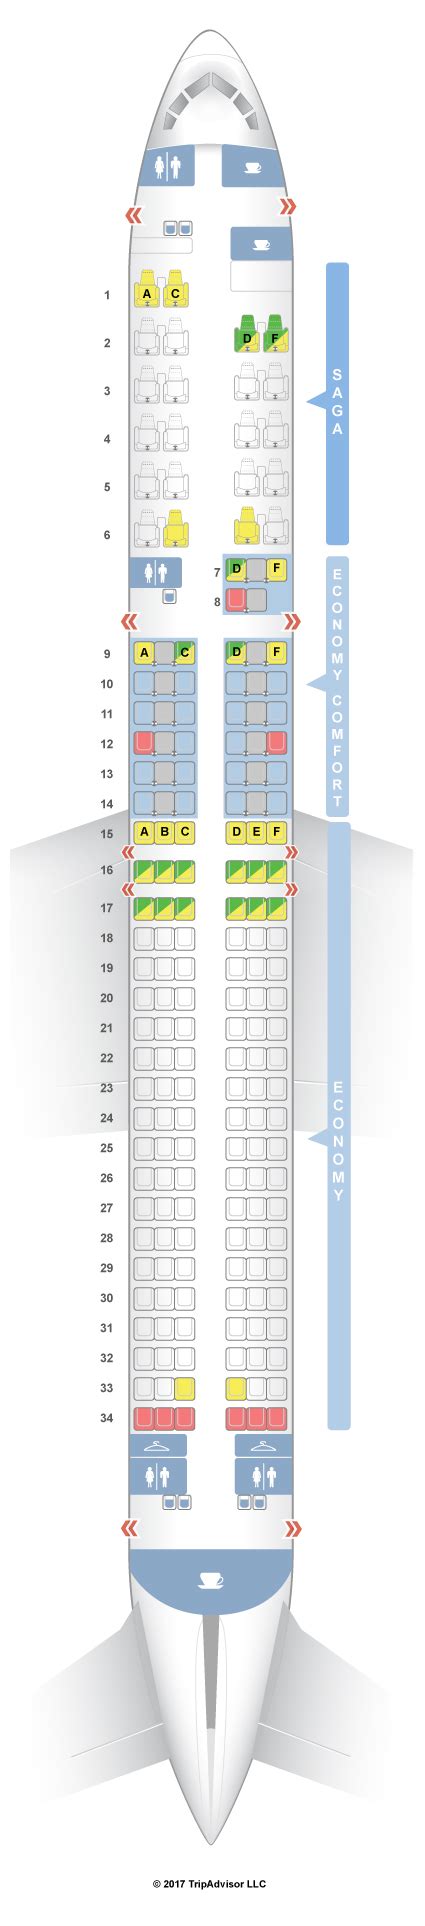 Food & Snacks. Seat 1A is a recliner business class window seat with 40-42" of seat pitch, which is average across Boeing 757-200's worldwide. 1A is positioned at the bulkhead, which means that no seat can recline into your space, but it may mean limited legroom for taller travelers, and there is no under-seat stowage during takeoff and landing.